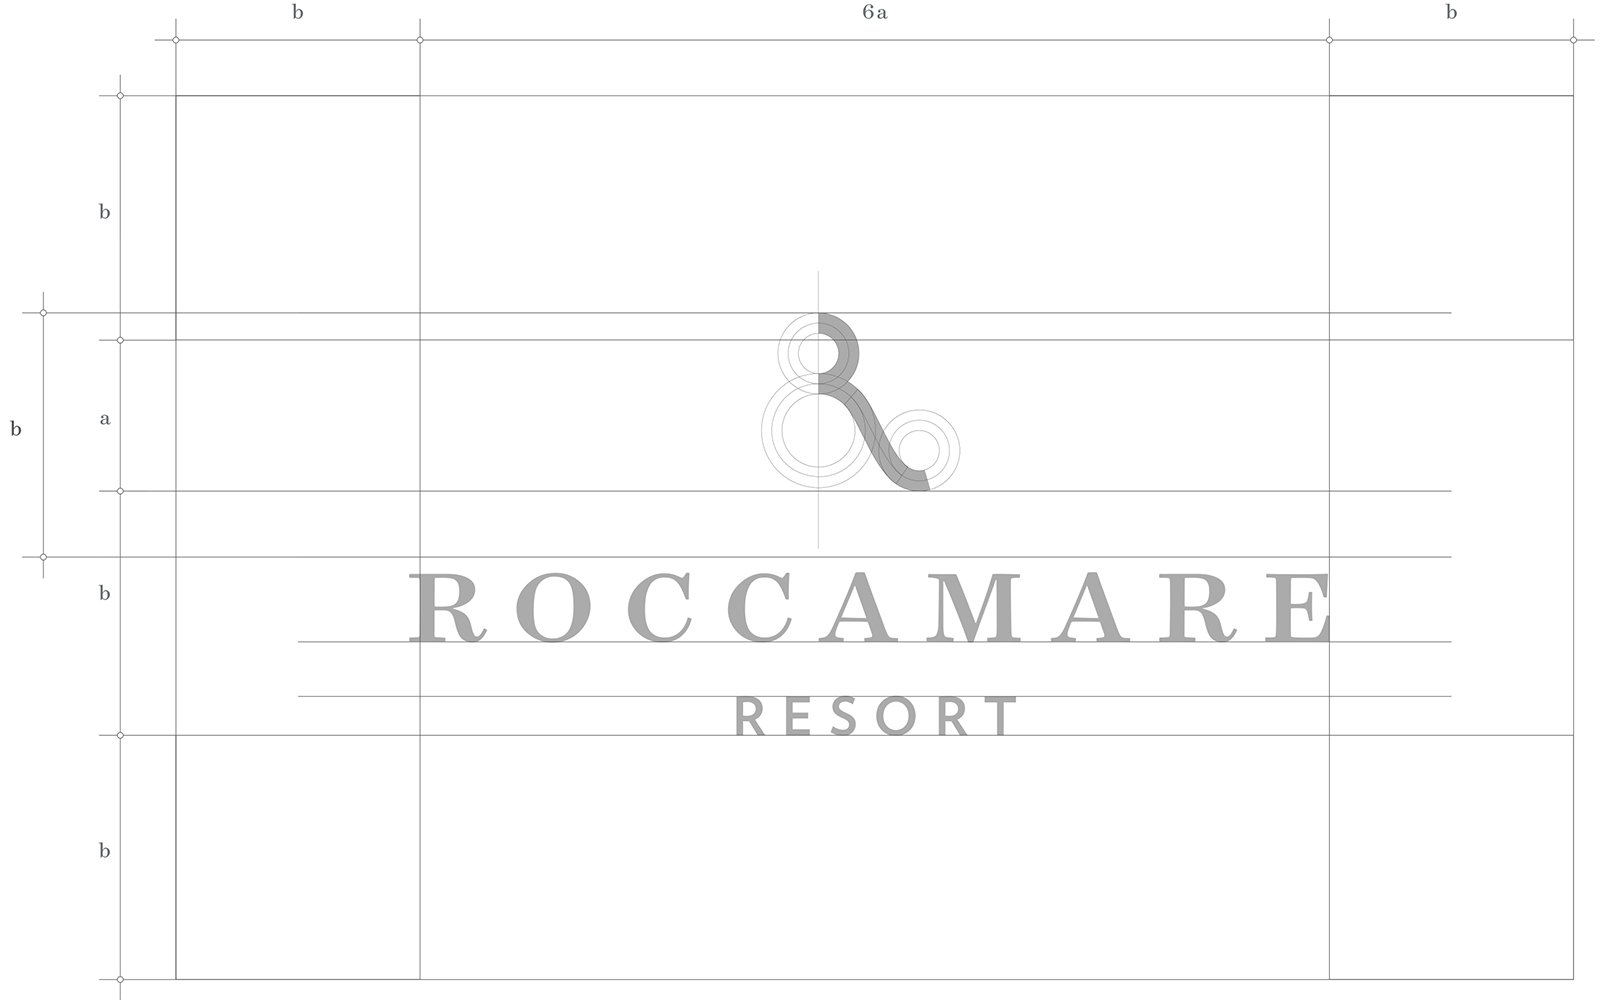 A new look for the Resort Roccamare